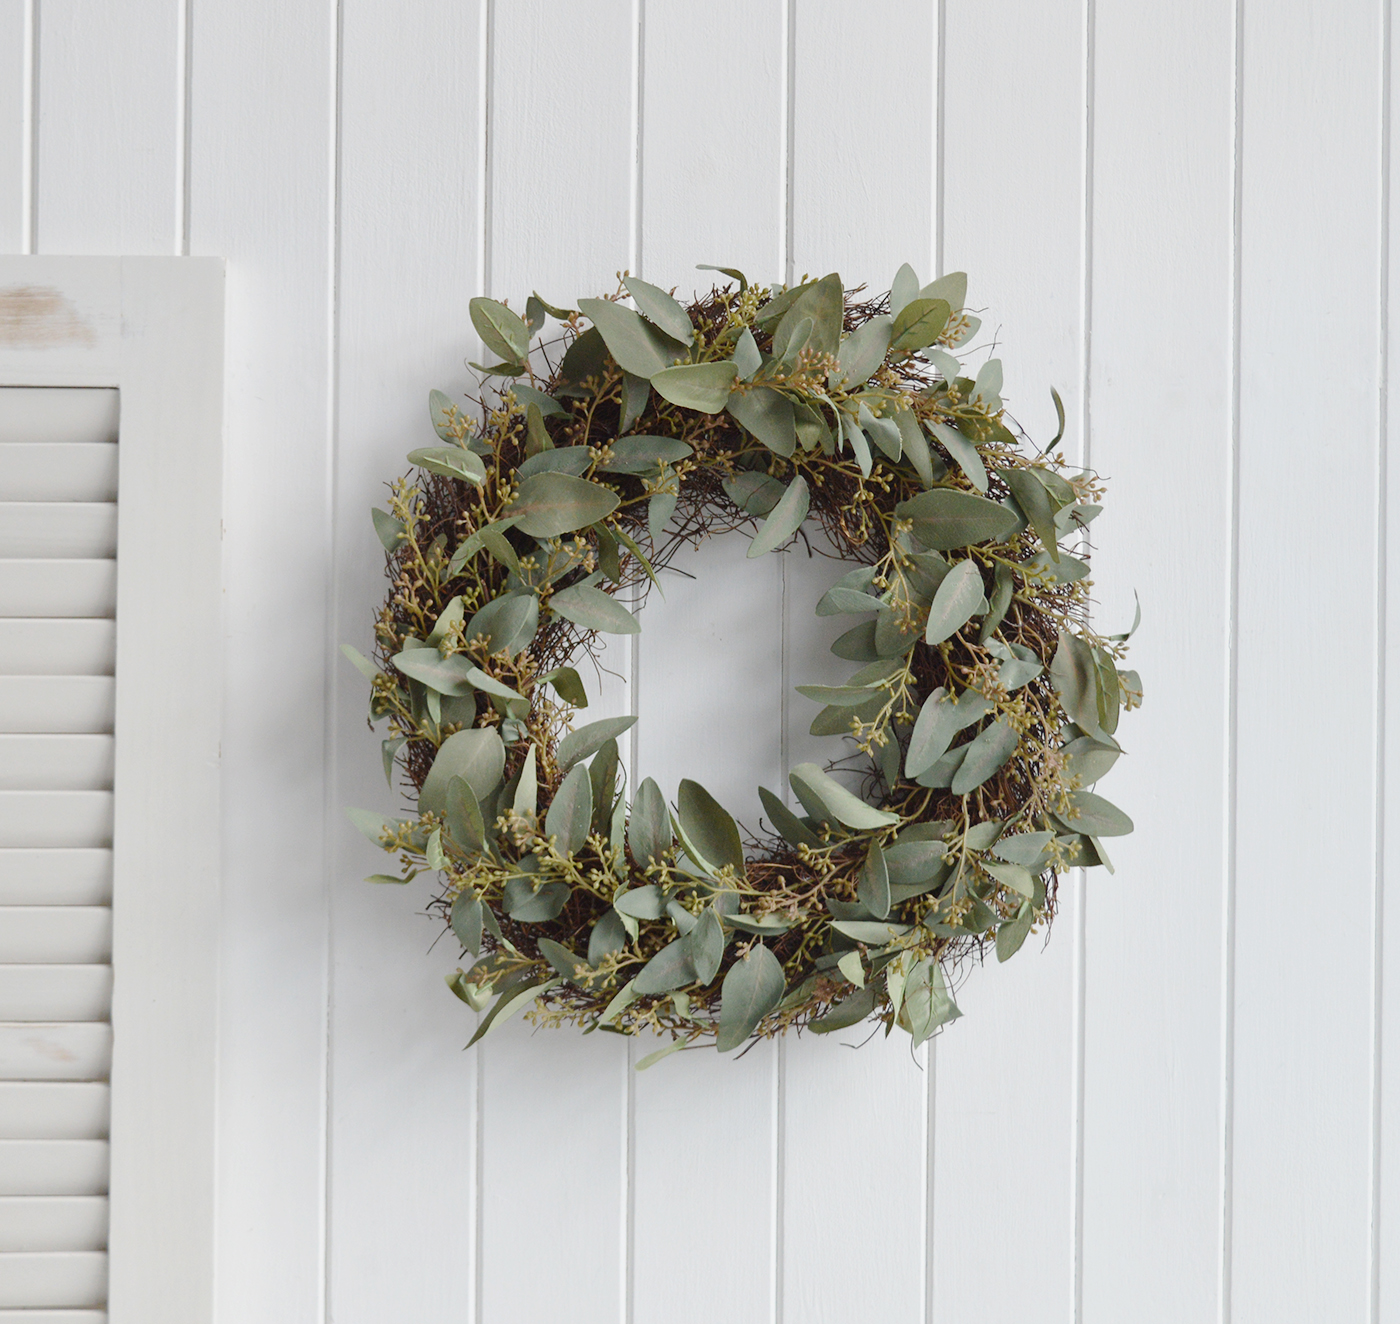 A beautilly crafted faux Eucalyptus wreath to give timeless New England style